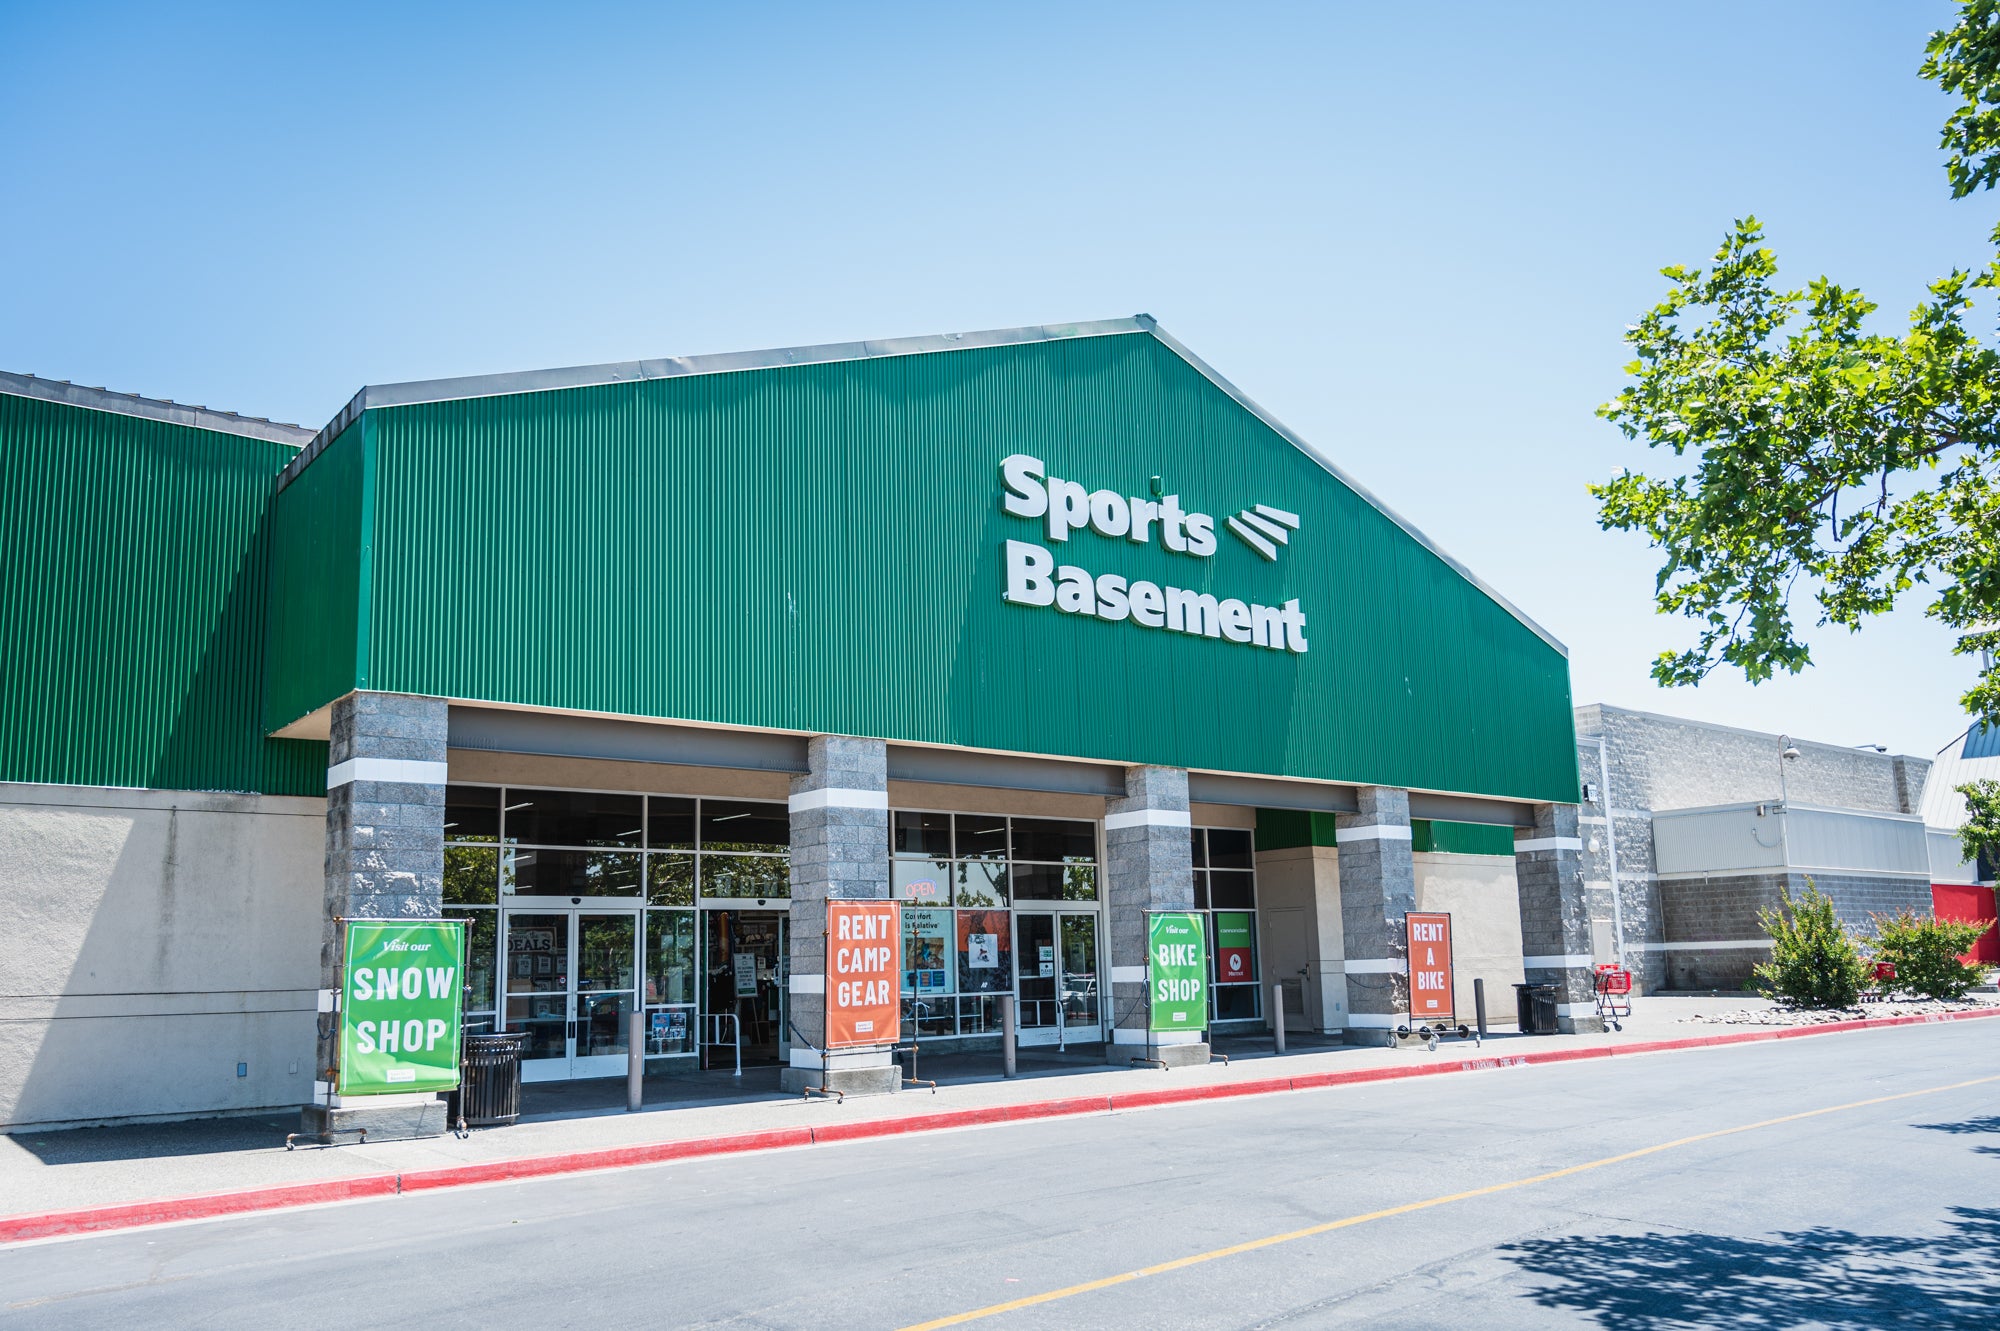 Sports Basement Stonestown: Your Ultimate Guide to Athletic Excellence